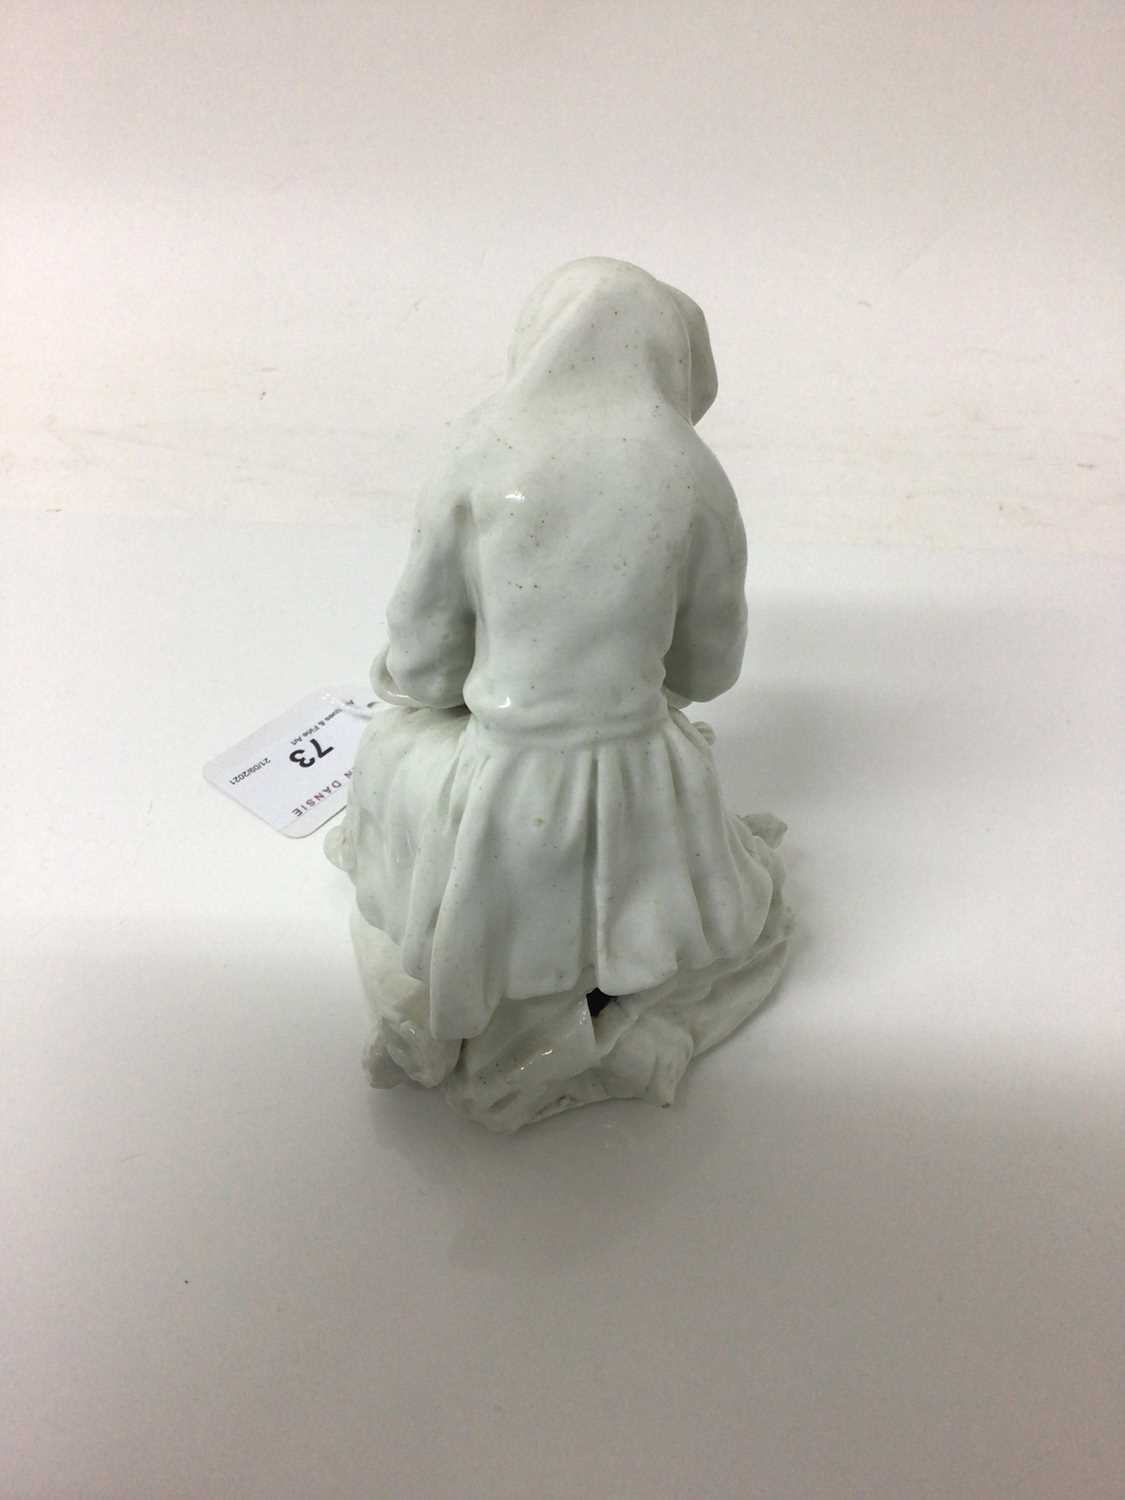 Bow blanc de chine figure, circa 1755, in the form of a seated elderly man warming his hands on a br - Image 2 of 9